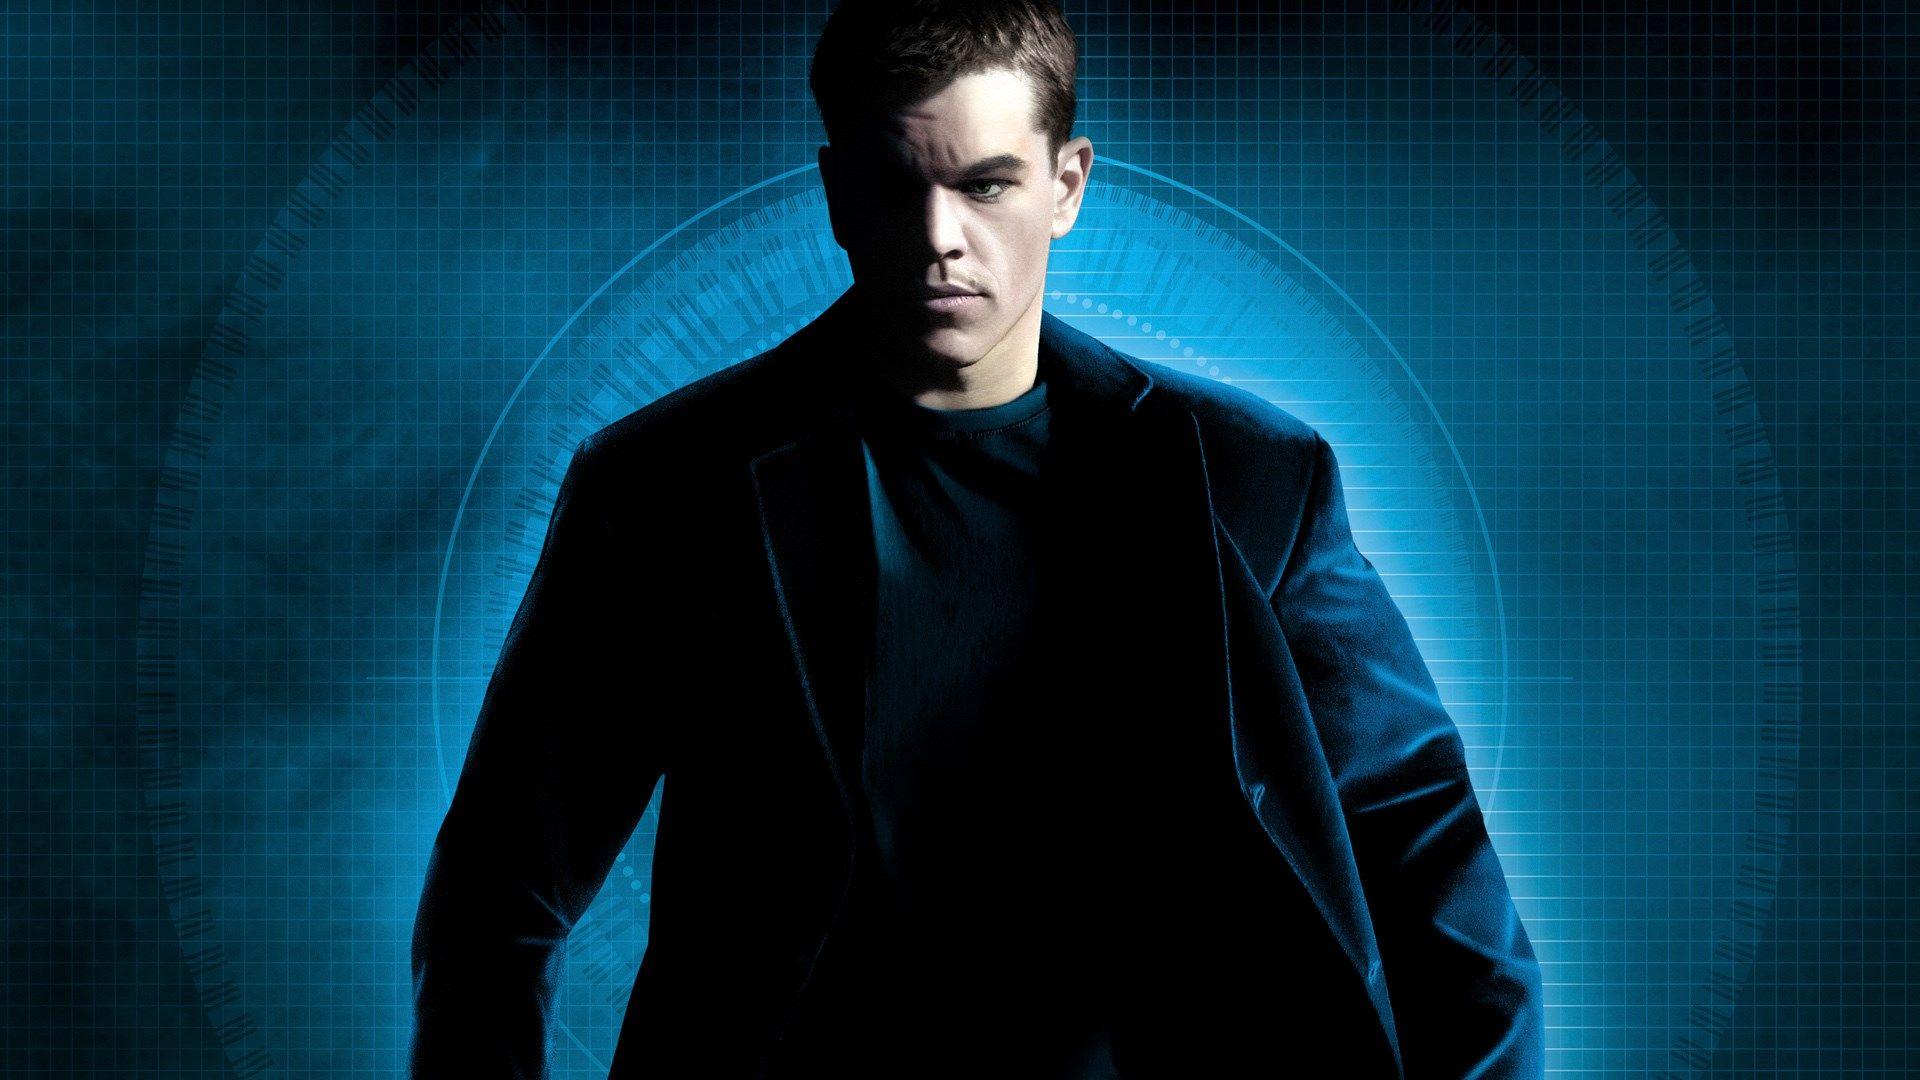 Wallpaper Image The Bourne Supremacy By Whittaker Brian 2017 03